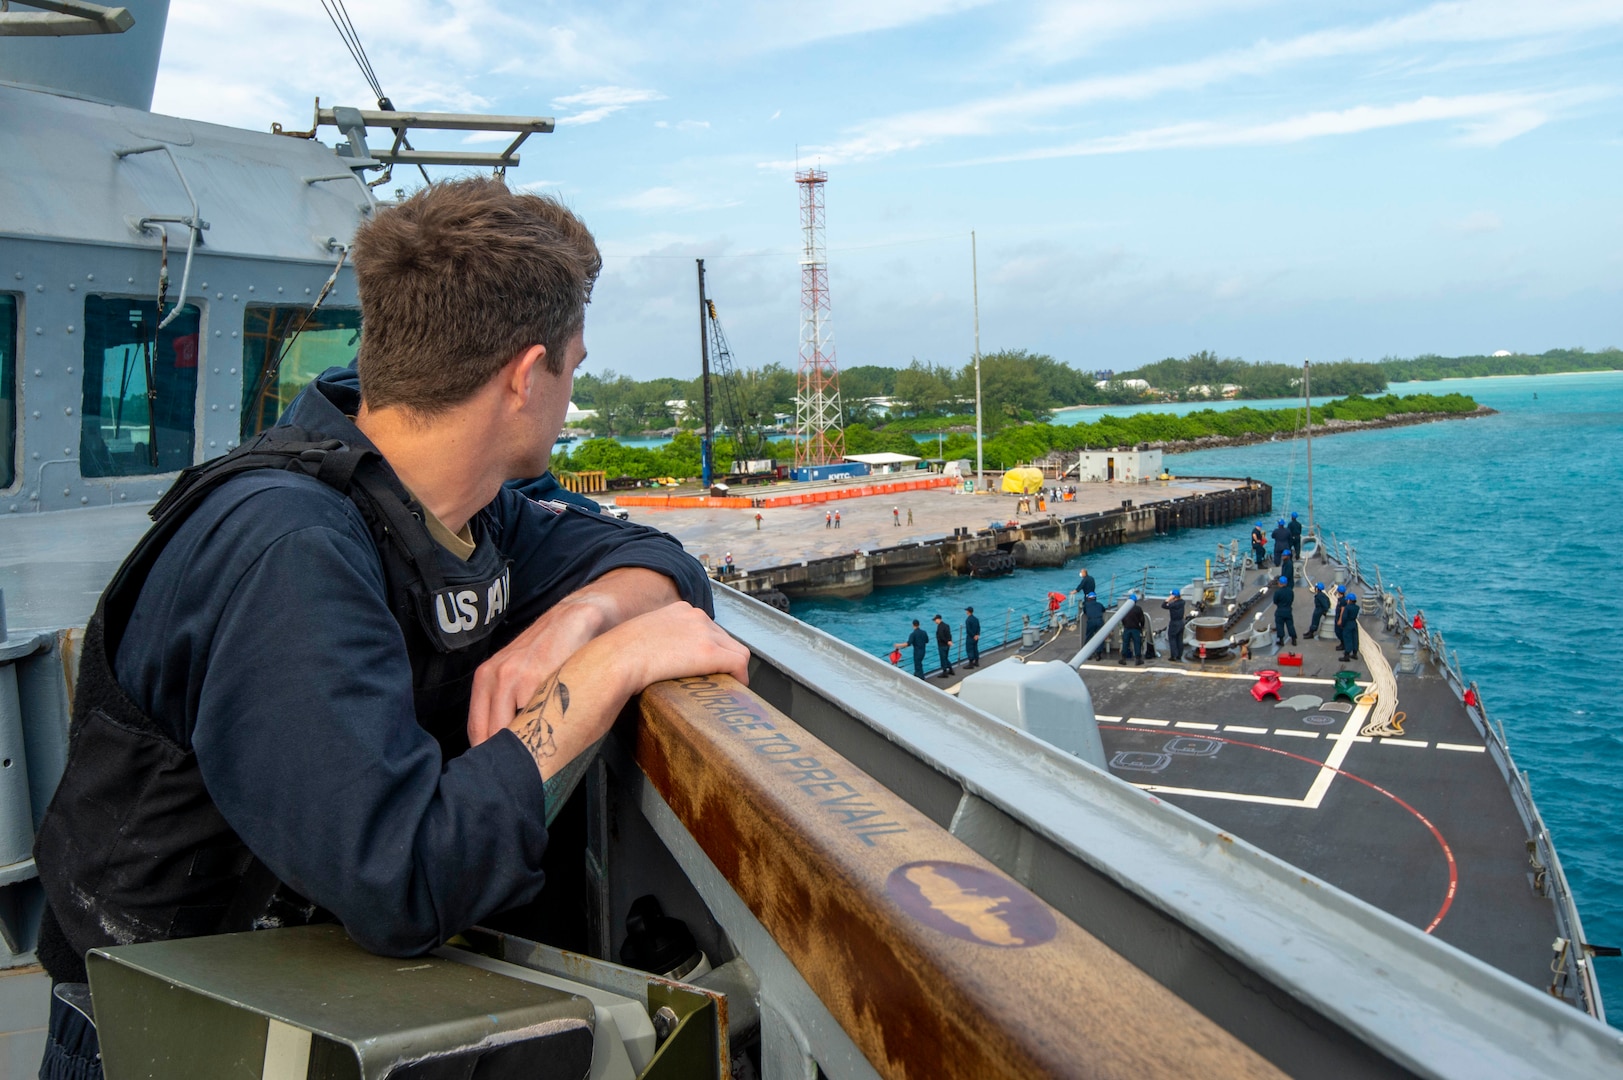 A U.S. Navy Sailor stands watch during sea-and-anchor detail on the bridgewing of the Arleigh Burke-class guided-missile destroyer USS Paul Hamilton (DDG 60) during a routine port visit. Paul Hamilton, part of the Nimitz Carrier Strike Group, is in U.S. 7th Fleet conducting routine operations. 7th Fleet is the U.S. Navy’s largest forward-deployed numbered fleet, and routinely interacts and operates with Allies and partners in preserving a free and open Indo-Pacific region. (U.S. Navy photo by Mass Communication Specialist 2nd Class Elliot Schaudt)